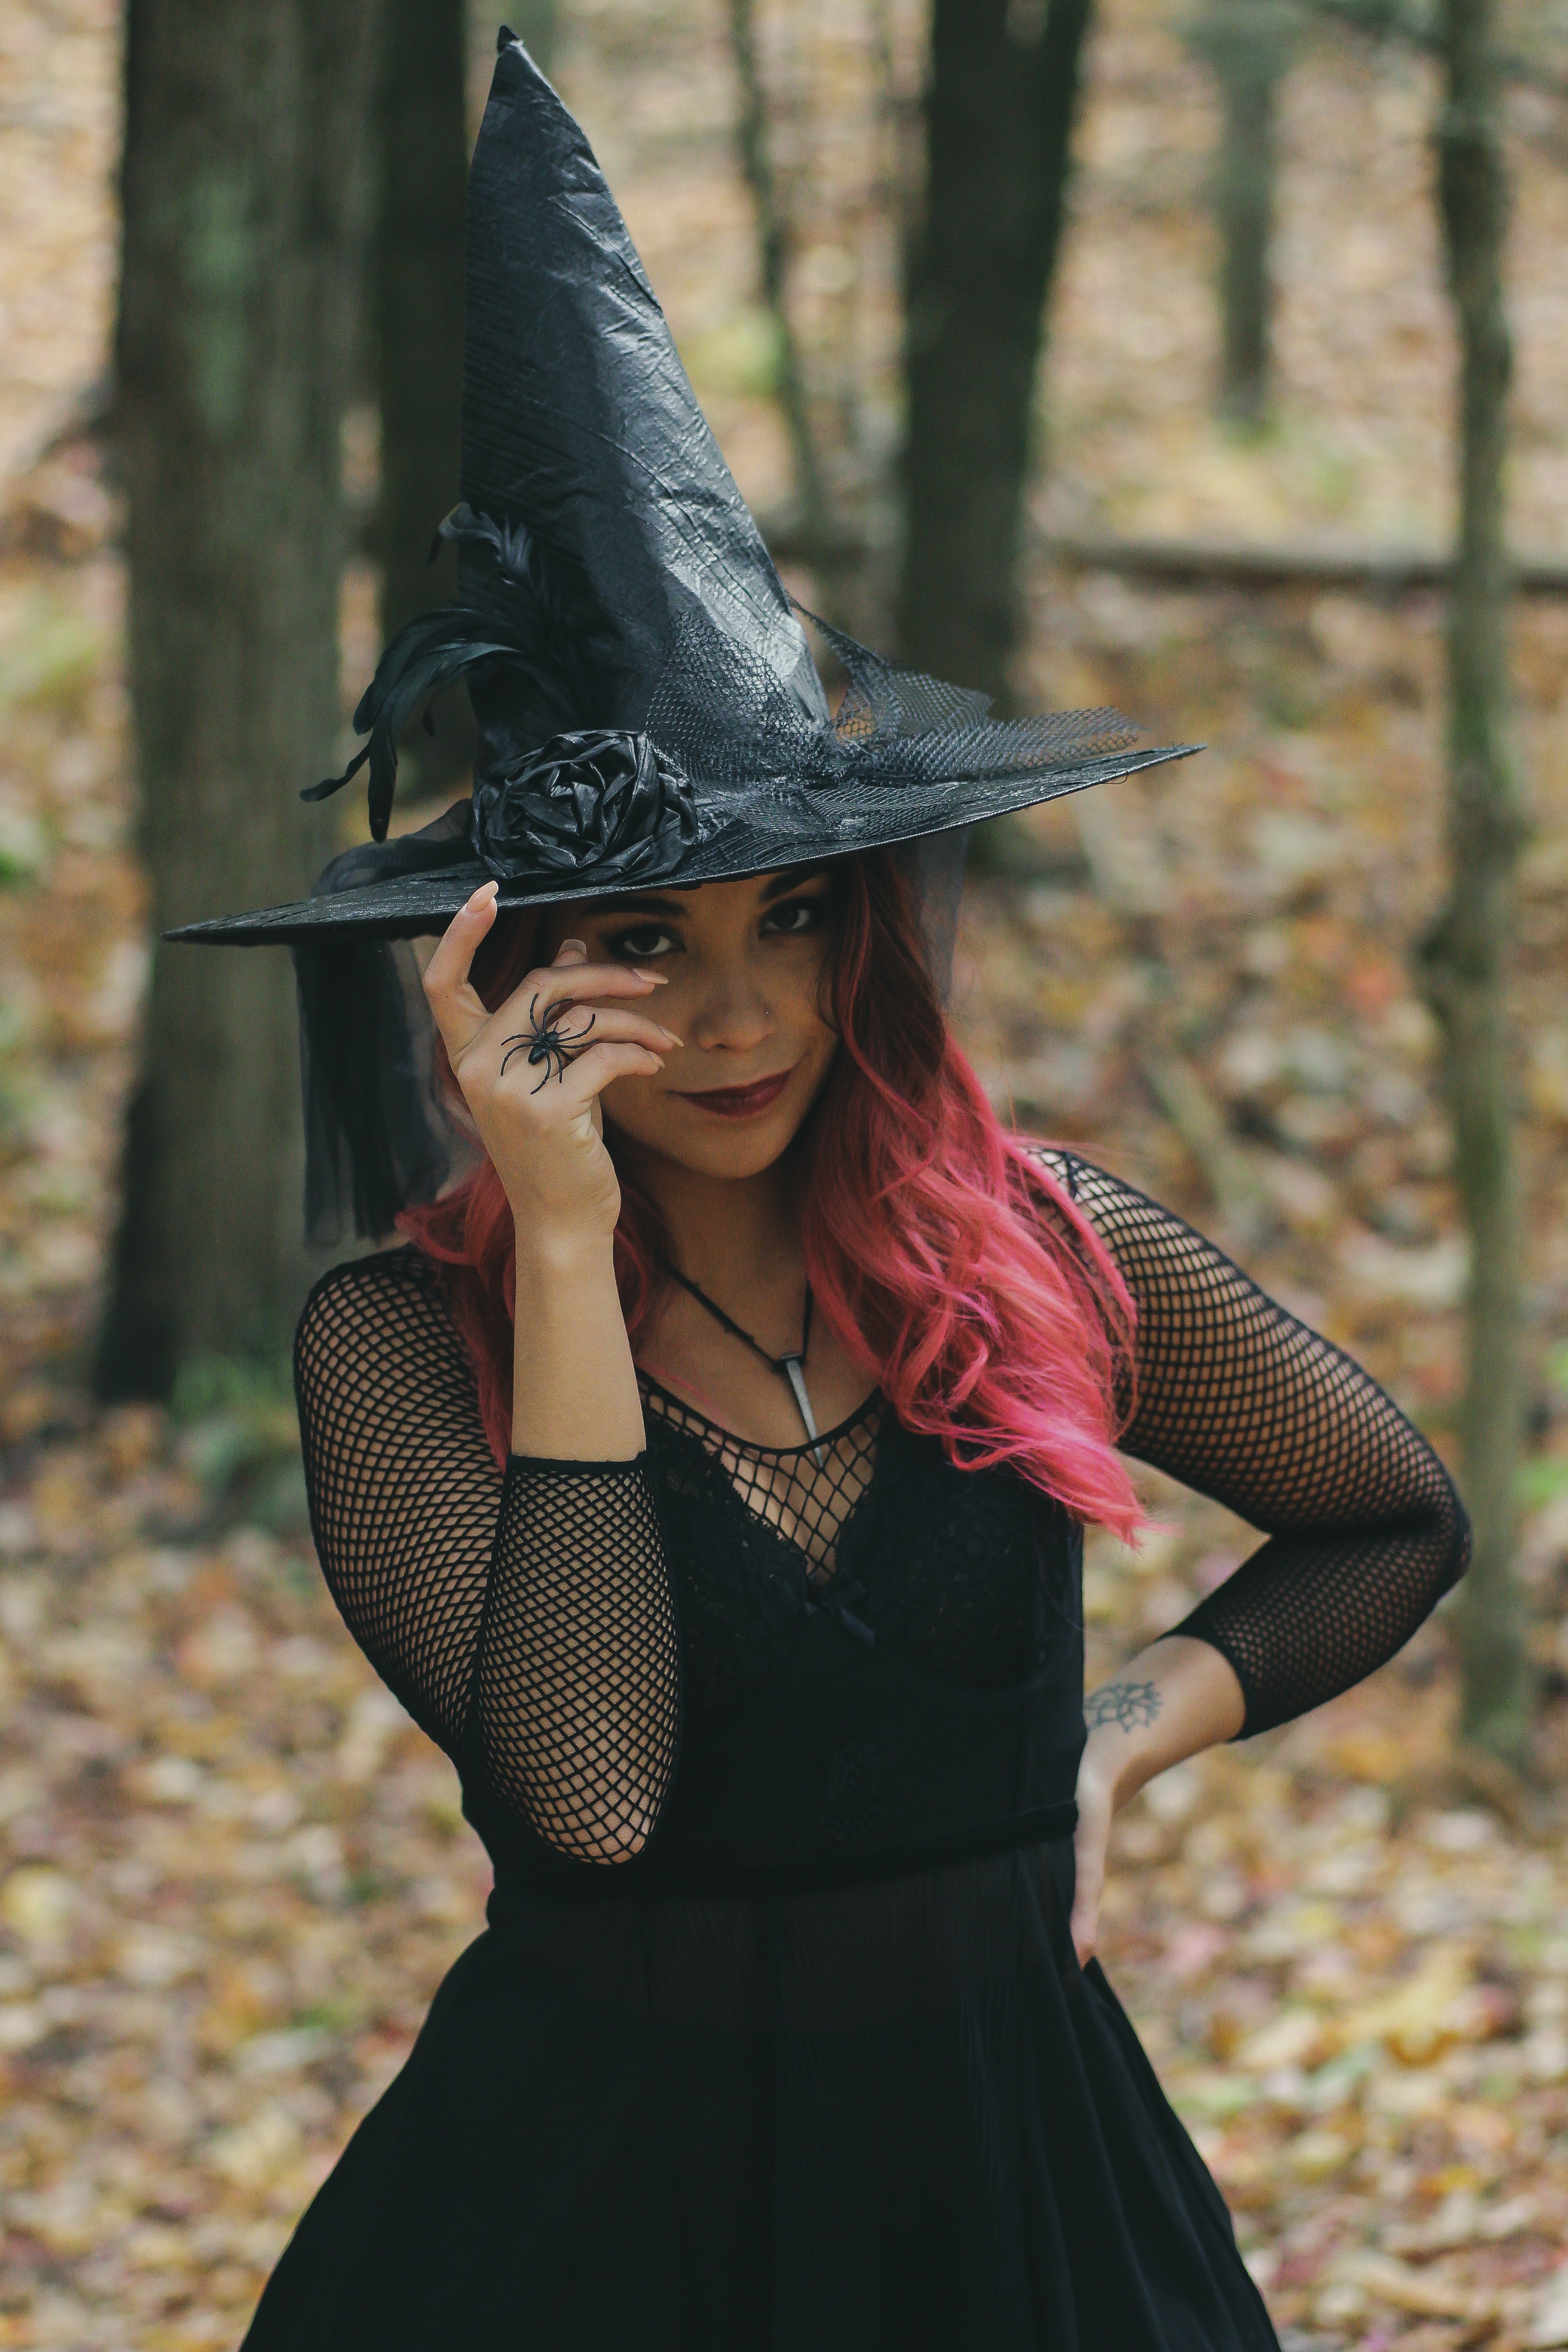 Classic Witch Costume for Halloween